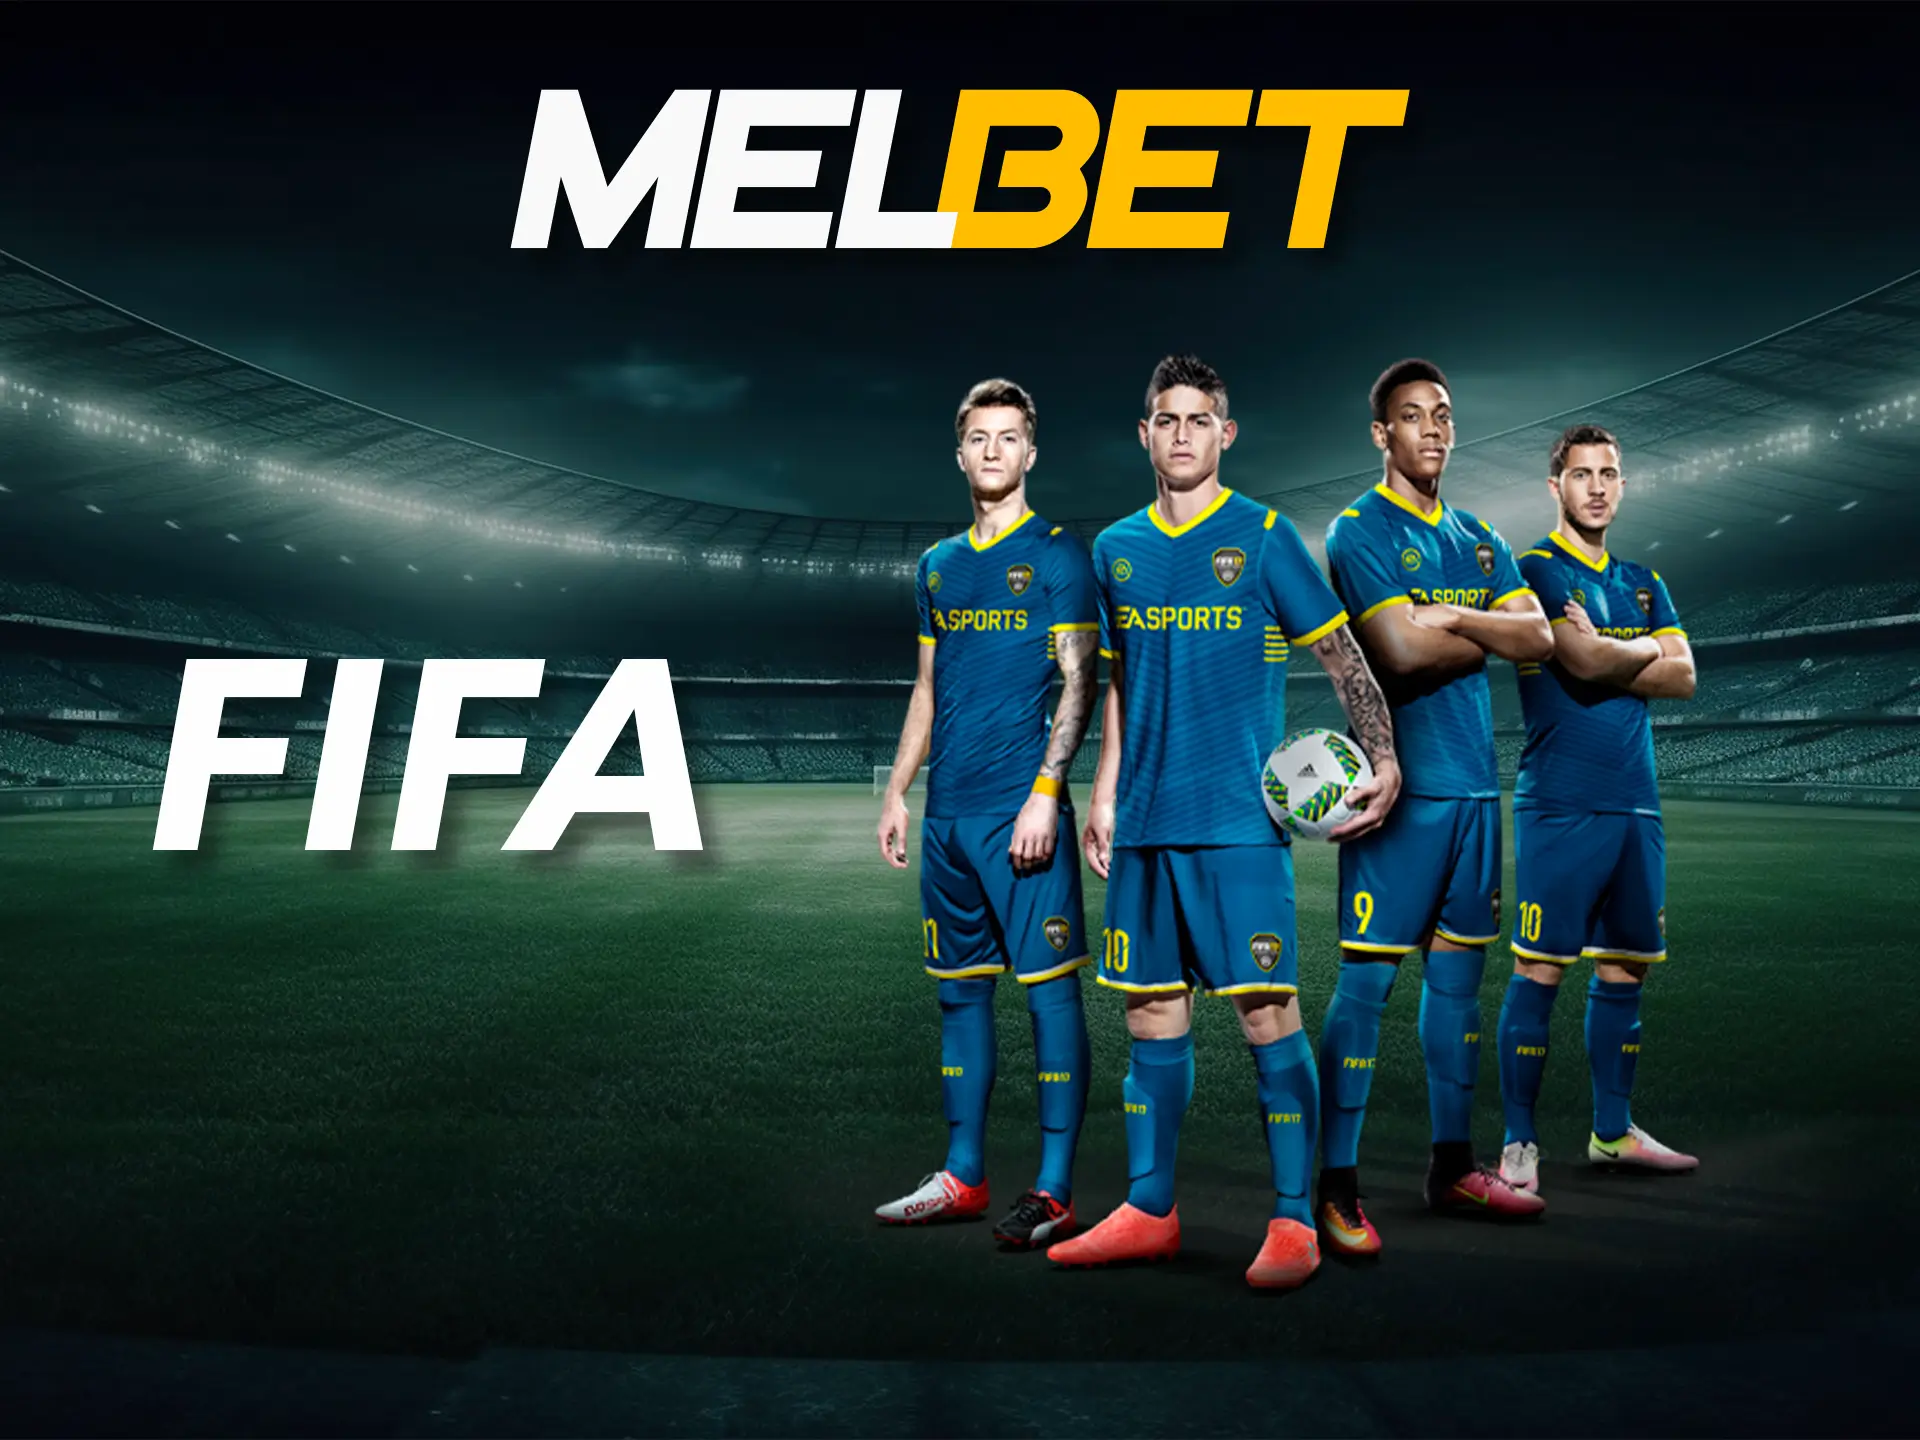 For football fans, Melbet has Fifa cyber sports competitions.